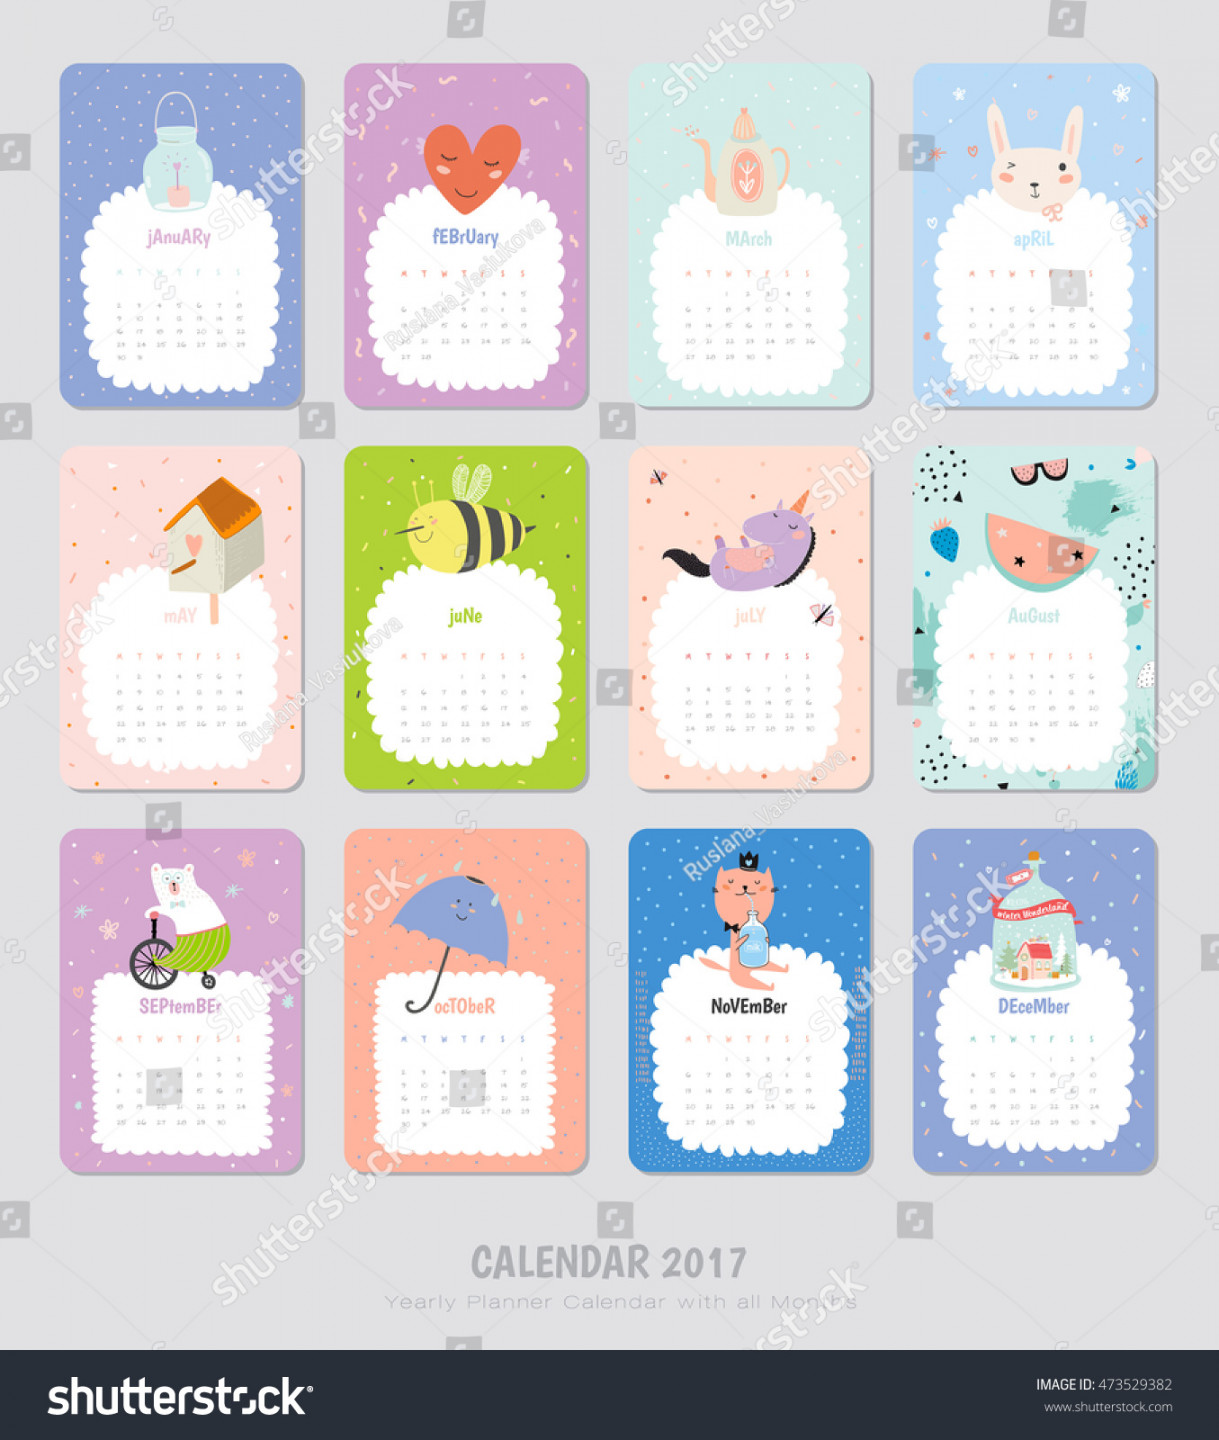 Cute Calendar Template  Yearly Planner Stock Vector (Royalty